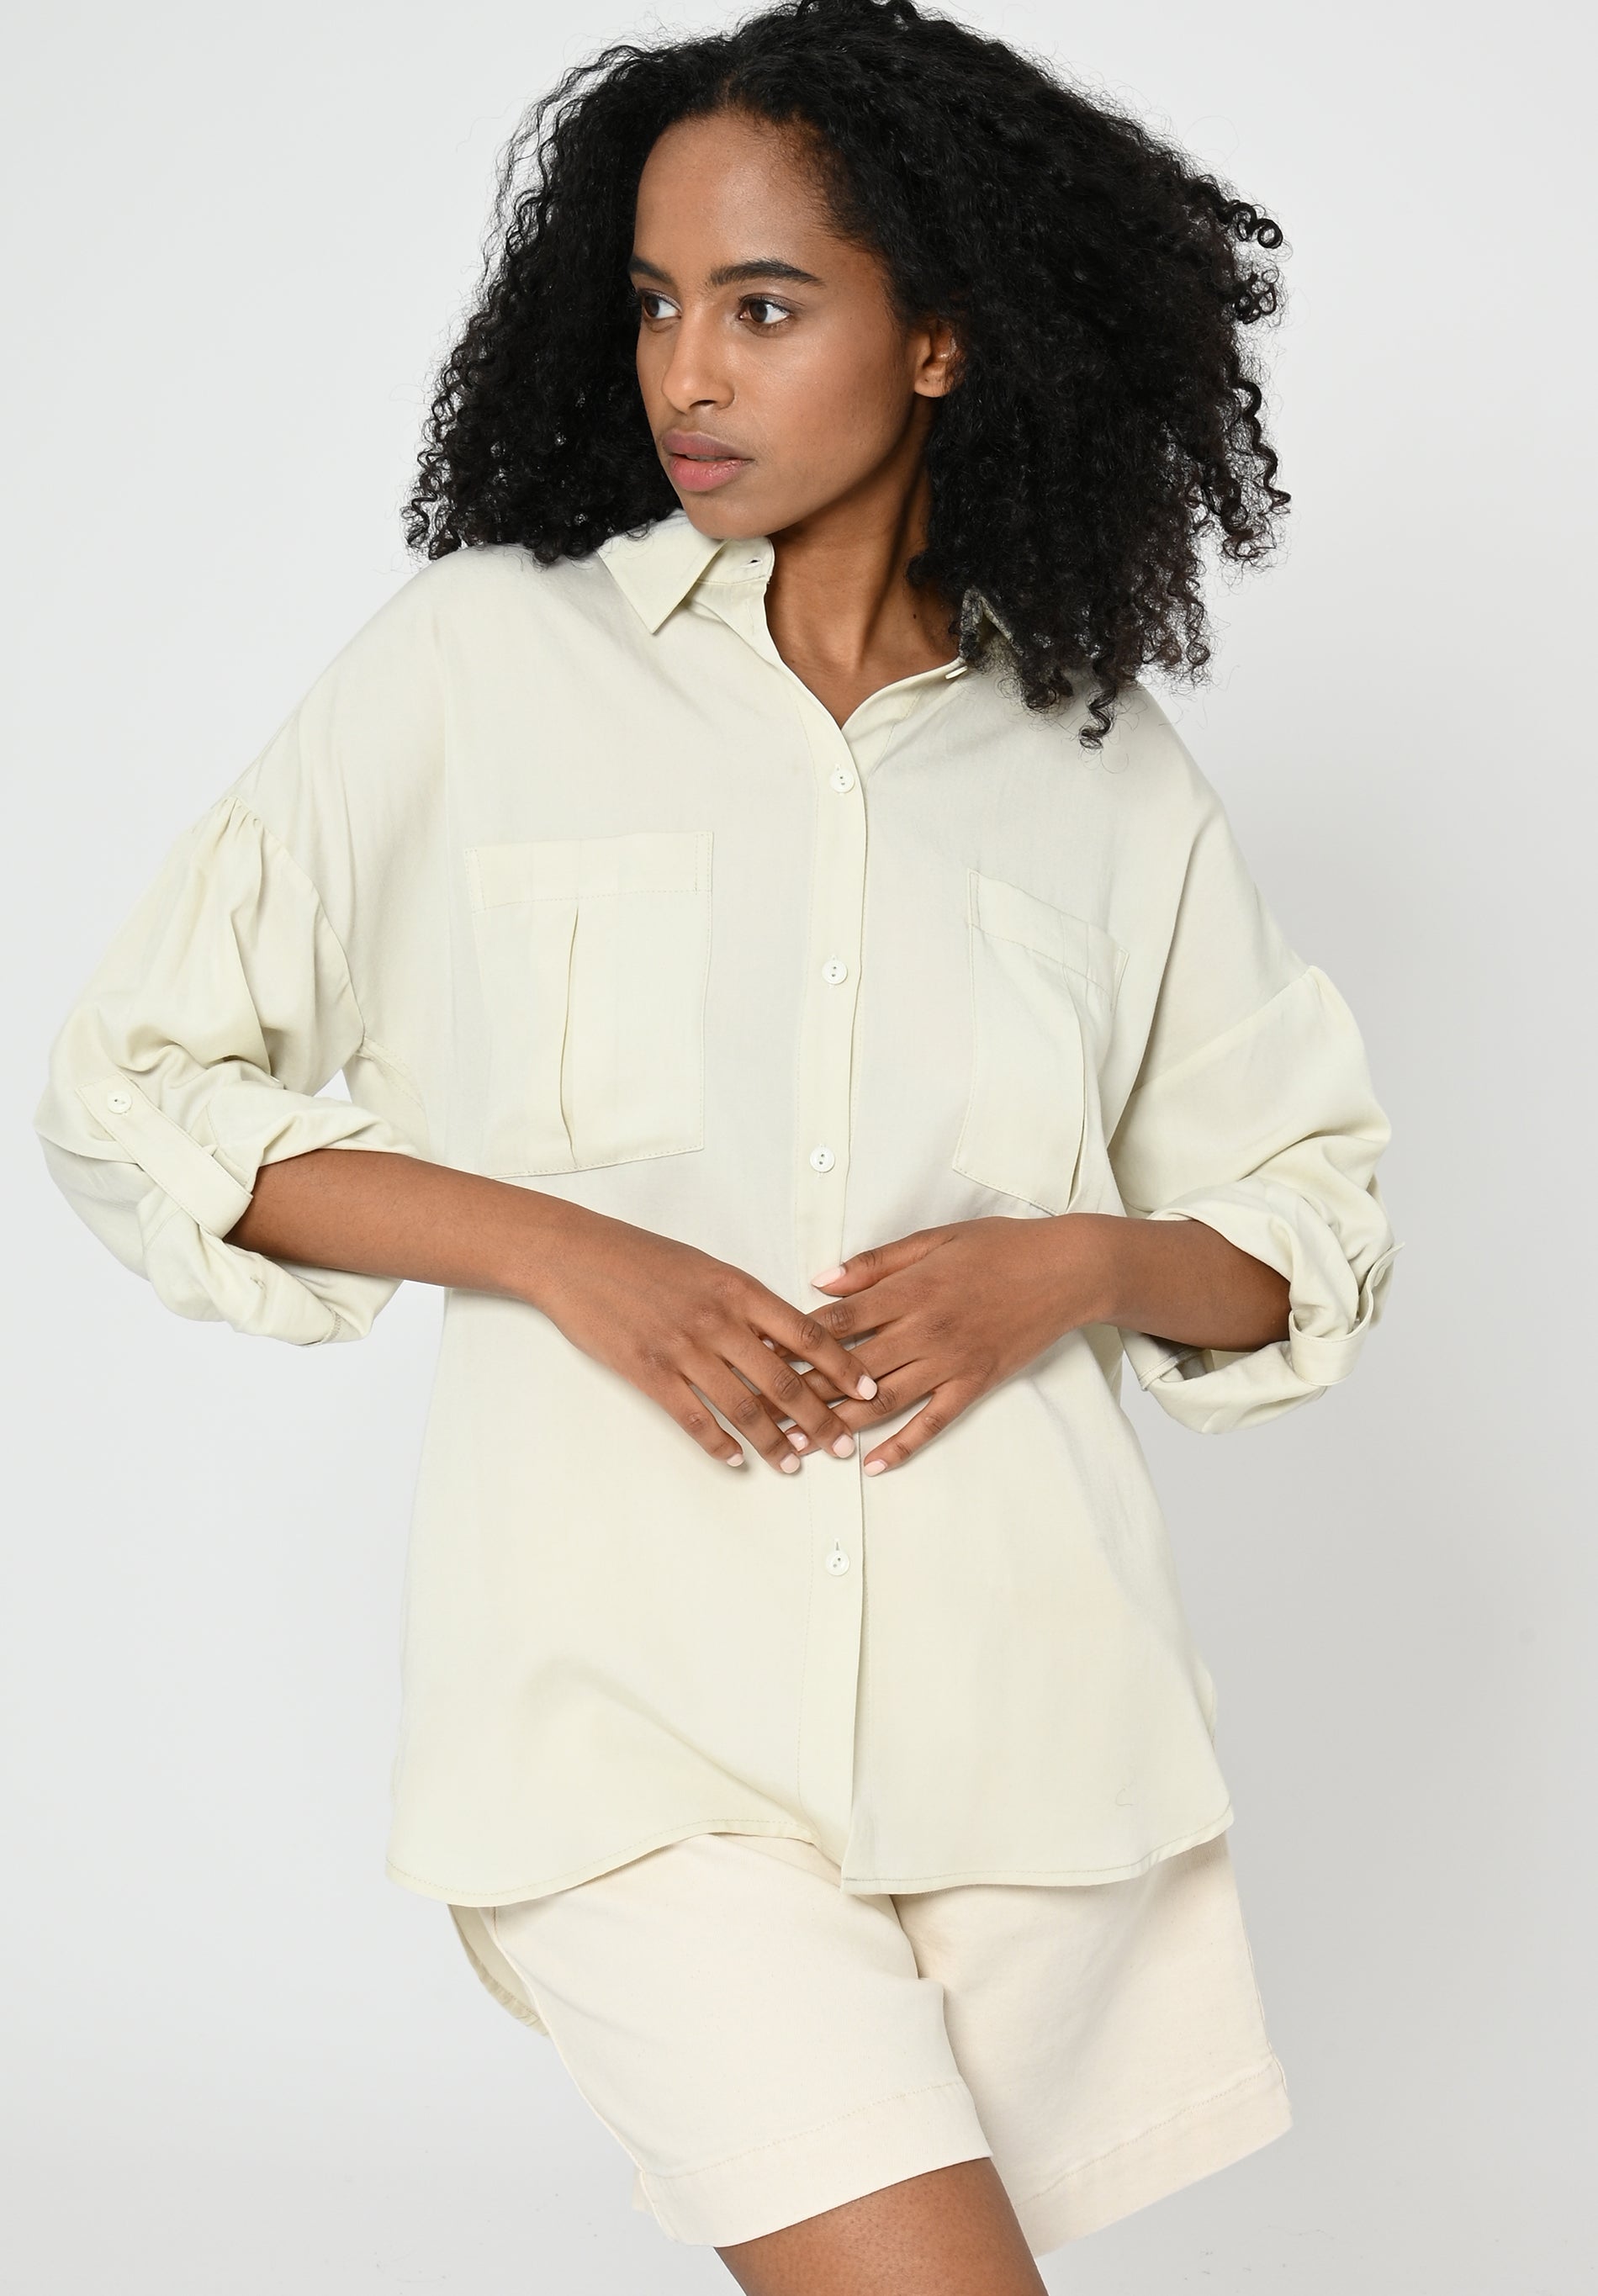 Blouse MANTARI in off white by LOVJOI made of TENCEL™